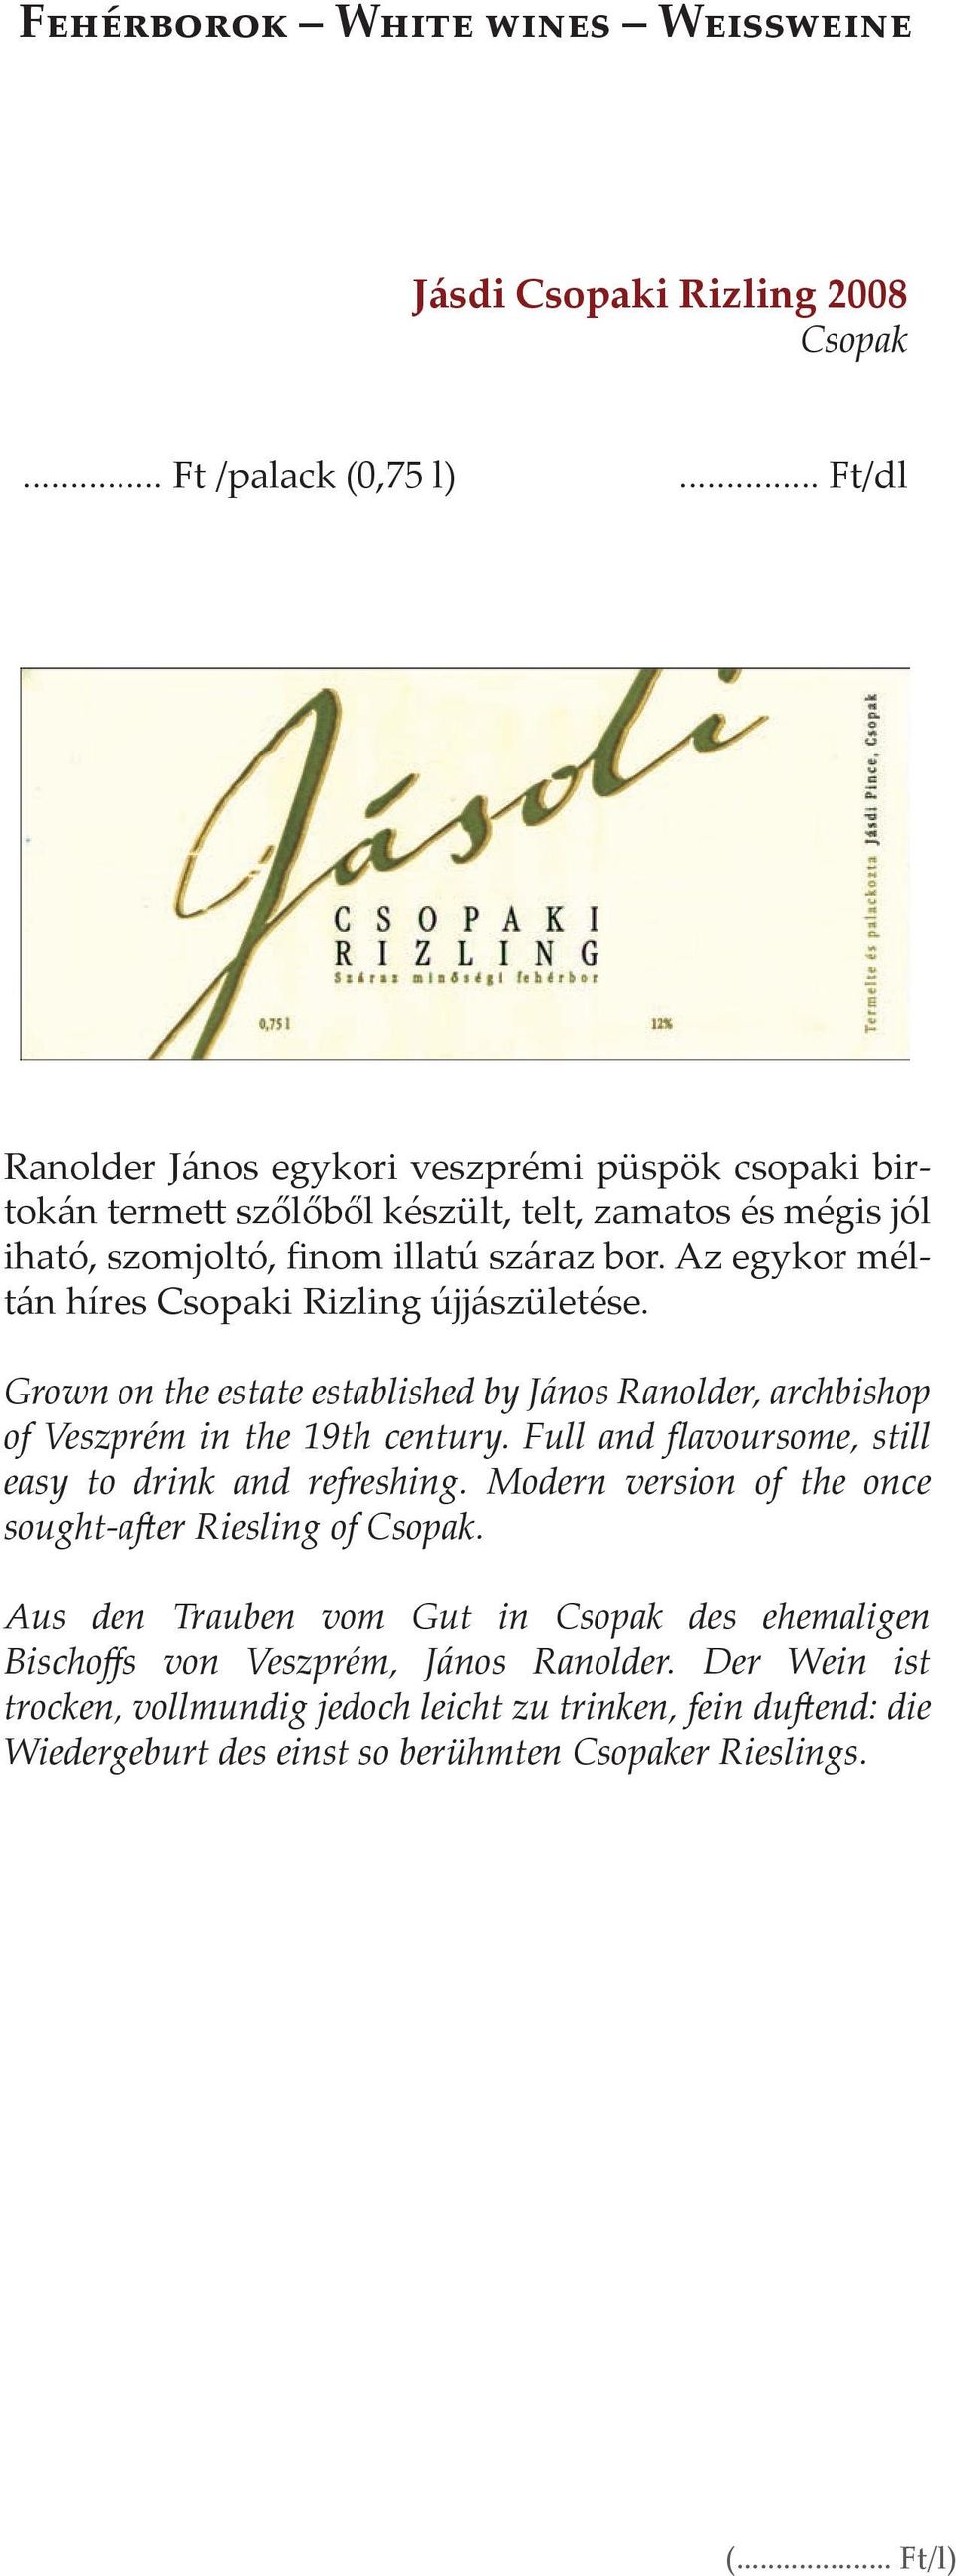 Grown on the estate established by János Ranolder, archbishop of Veszprém in the 19th century. Full and flavoursome, still easy to drink and refreshing.